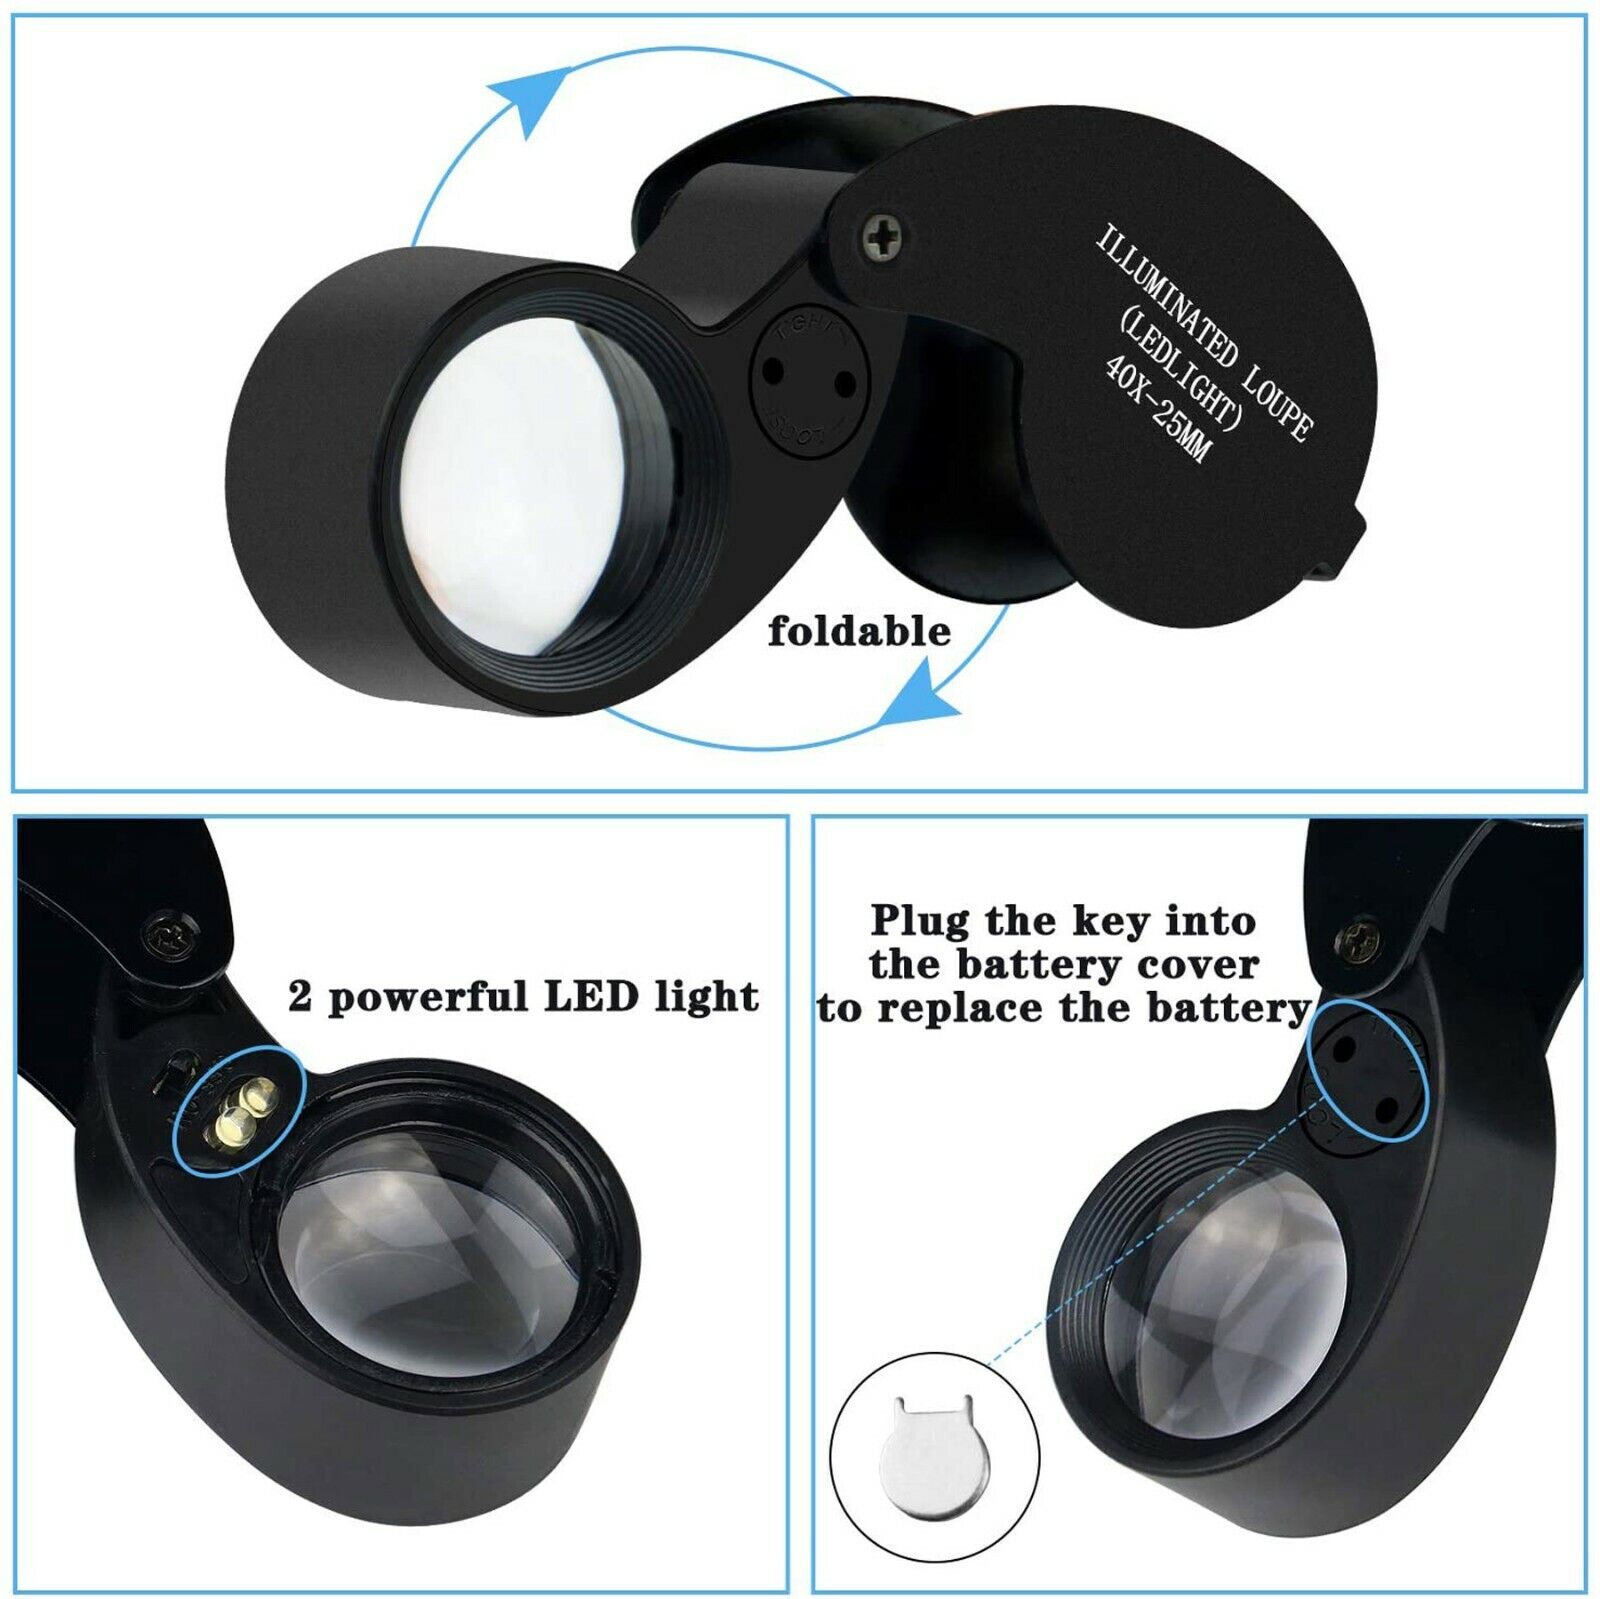 40X Magnifying Loupe Jewelry Eye Glass Magnifier LED Light